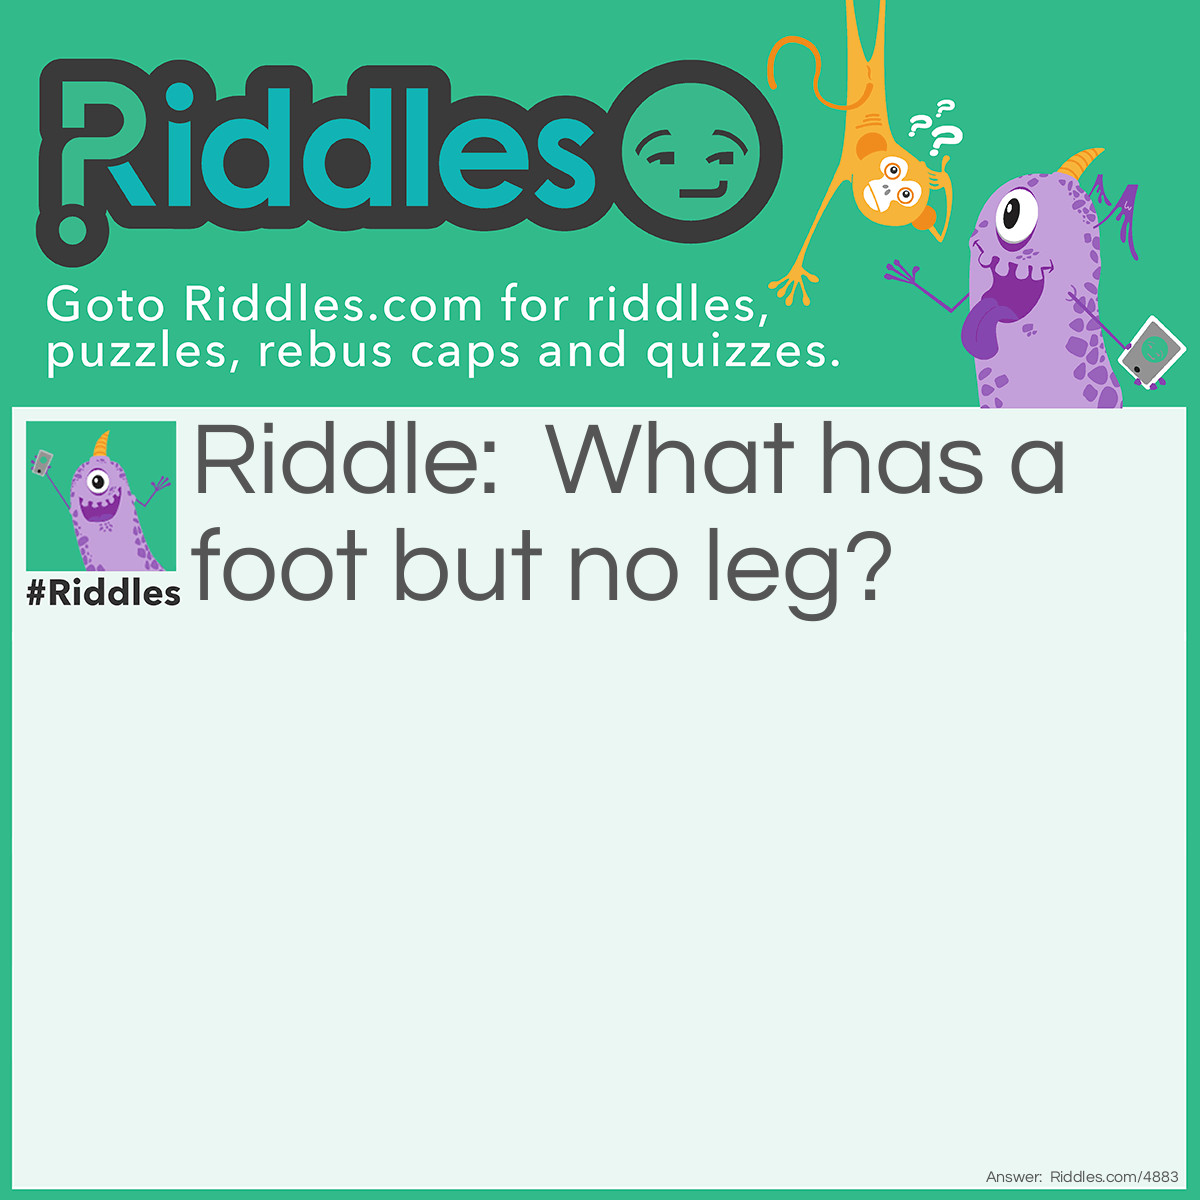 Riddle: What has a foot but no leg? Answer: A ruler!